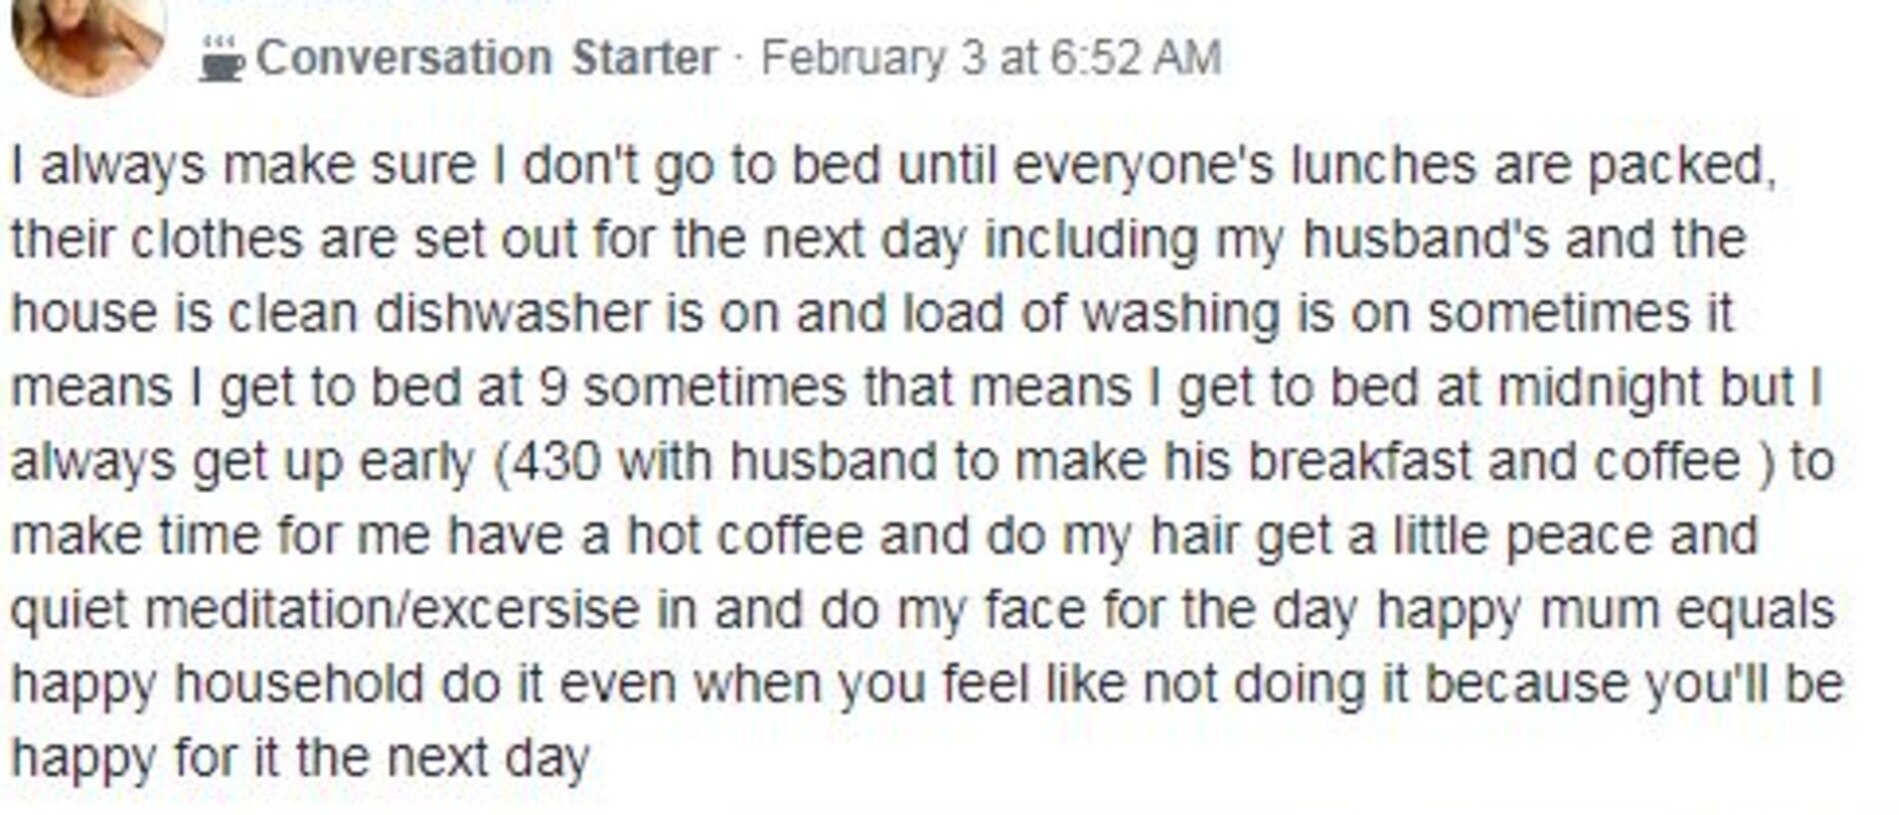 The Brisbane mum shared her night and morning routine on Facebook. Picture: Facebook/Mums Who Cook, Clean and Organise